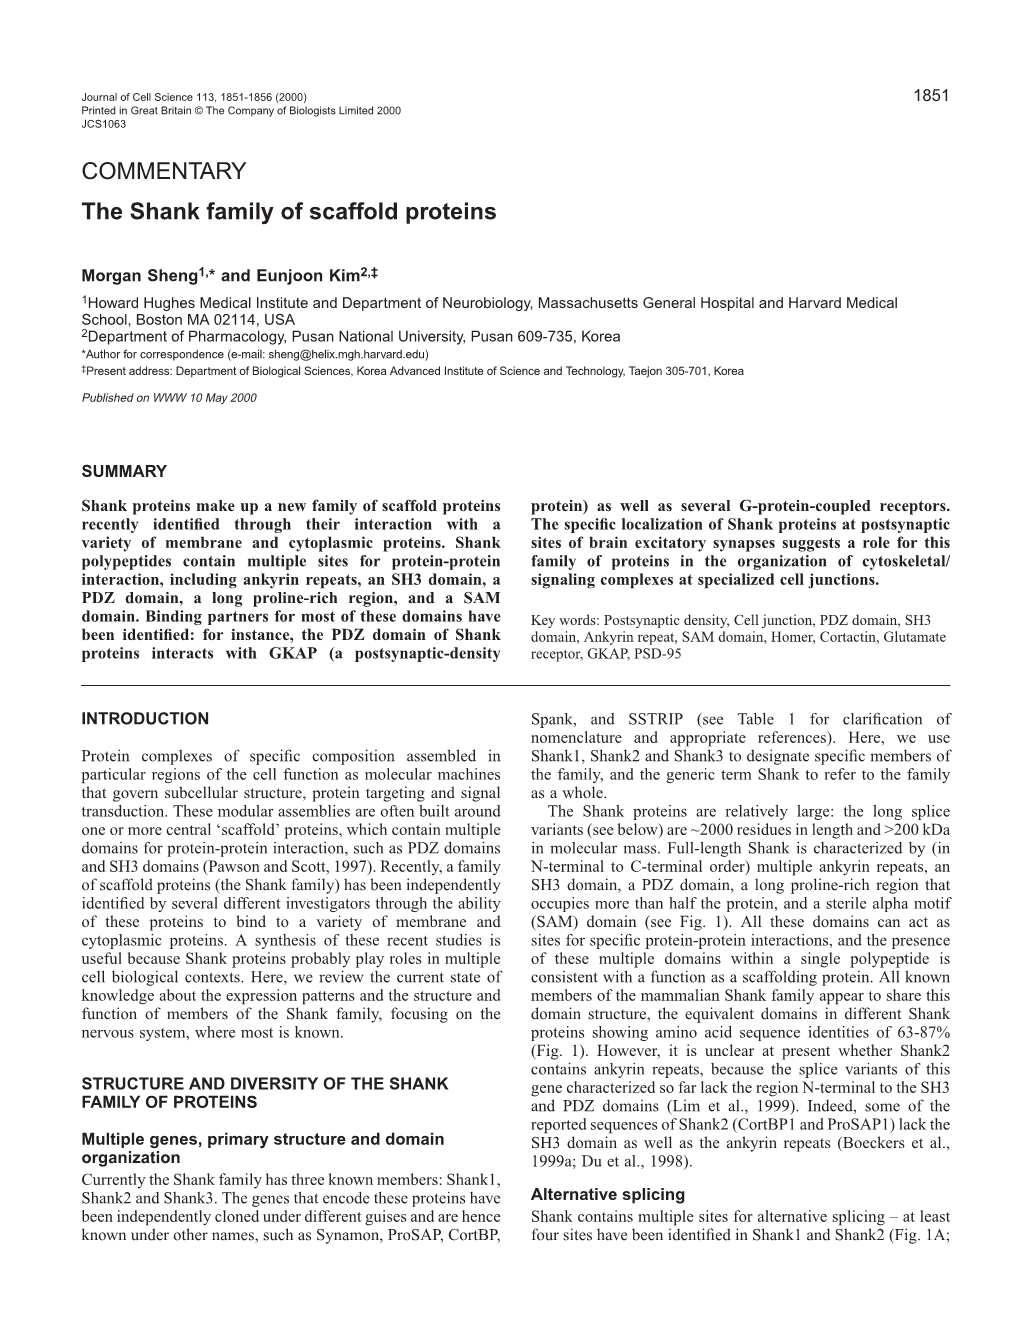 The Shank Family of Scaffold Proteins